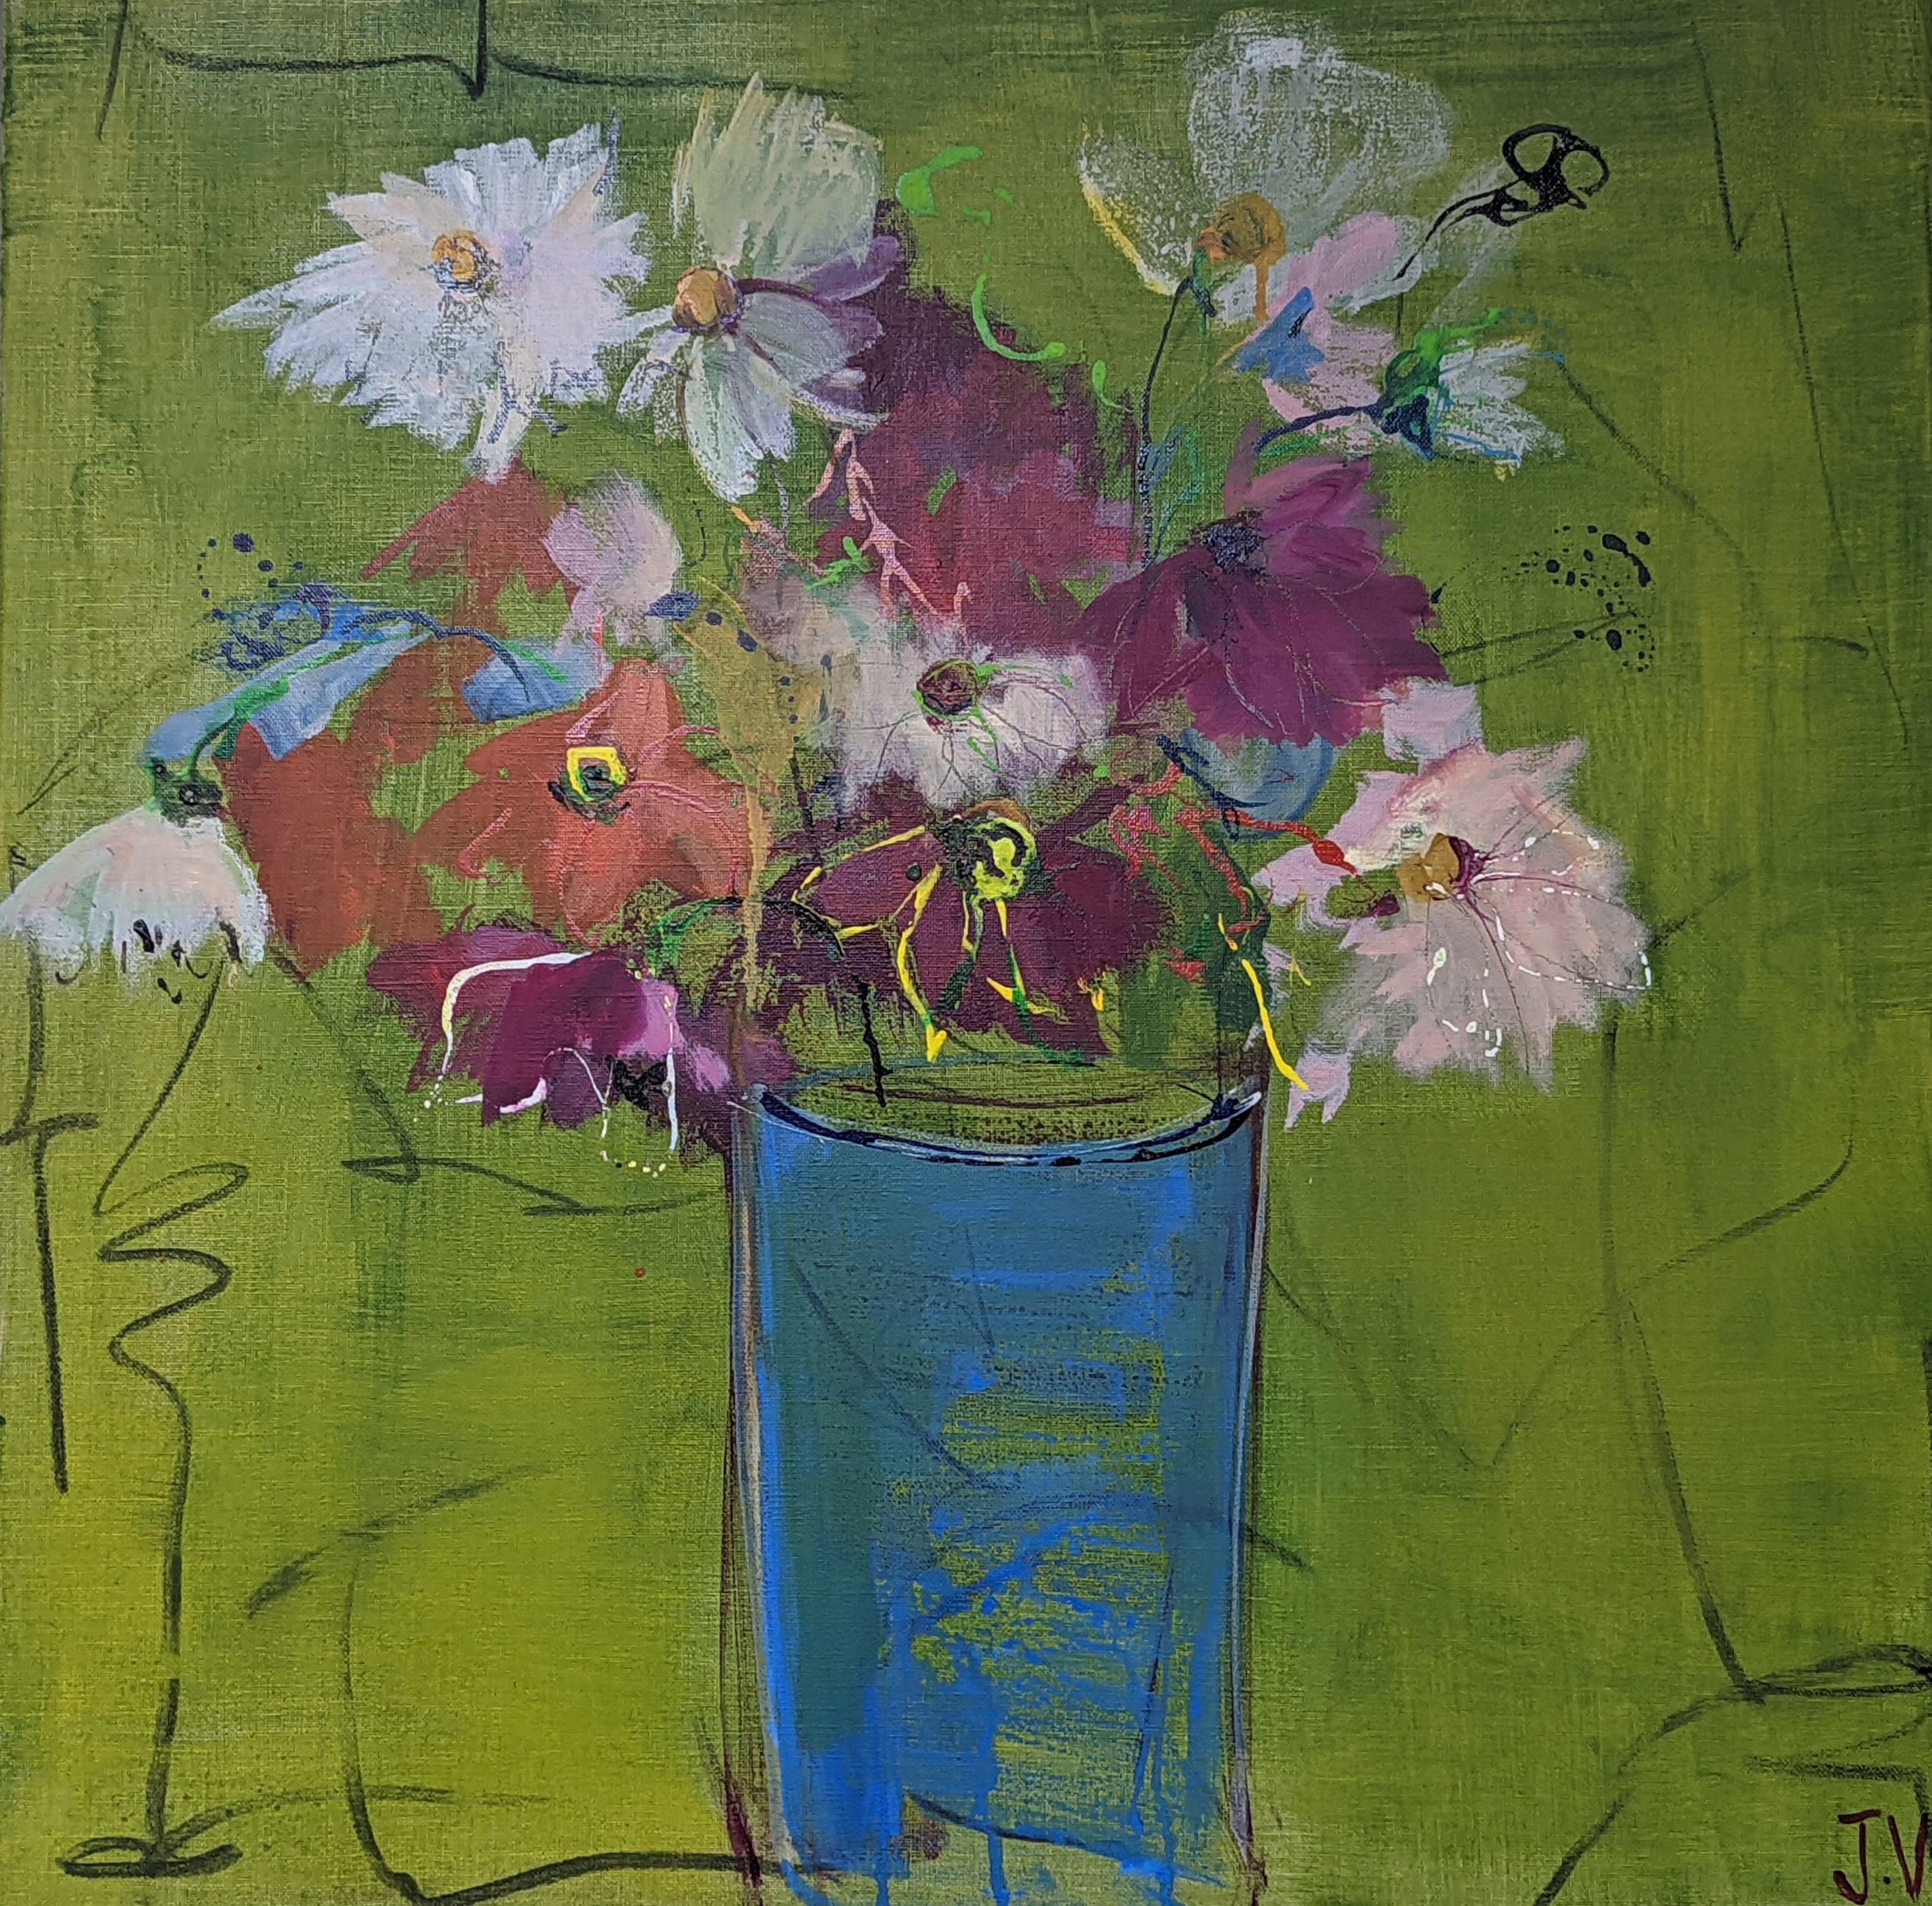 Jo Volten, acrylic on canvas, Blue vase on green with summer flowers, initialled and dated 2020, 60 x 60cm